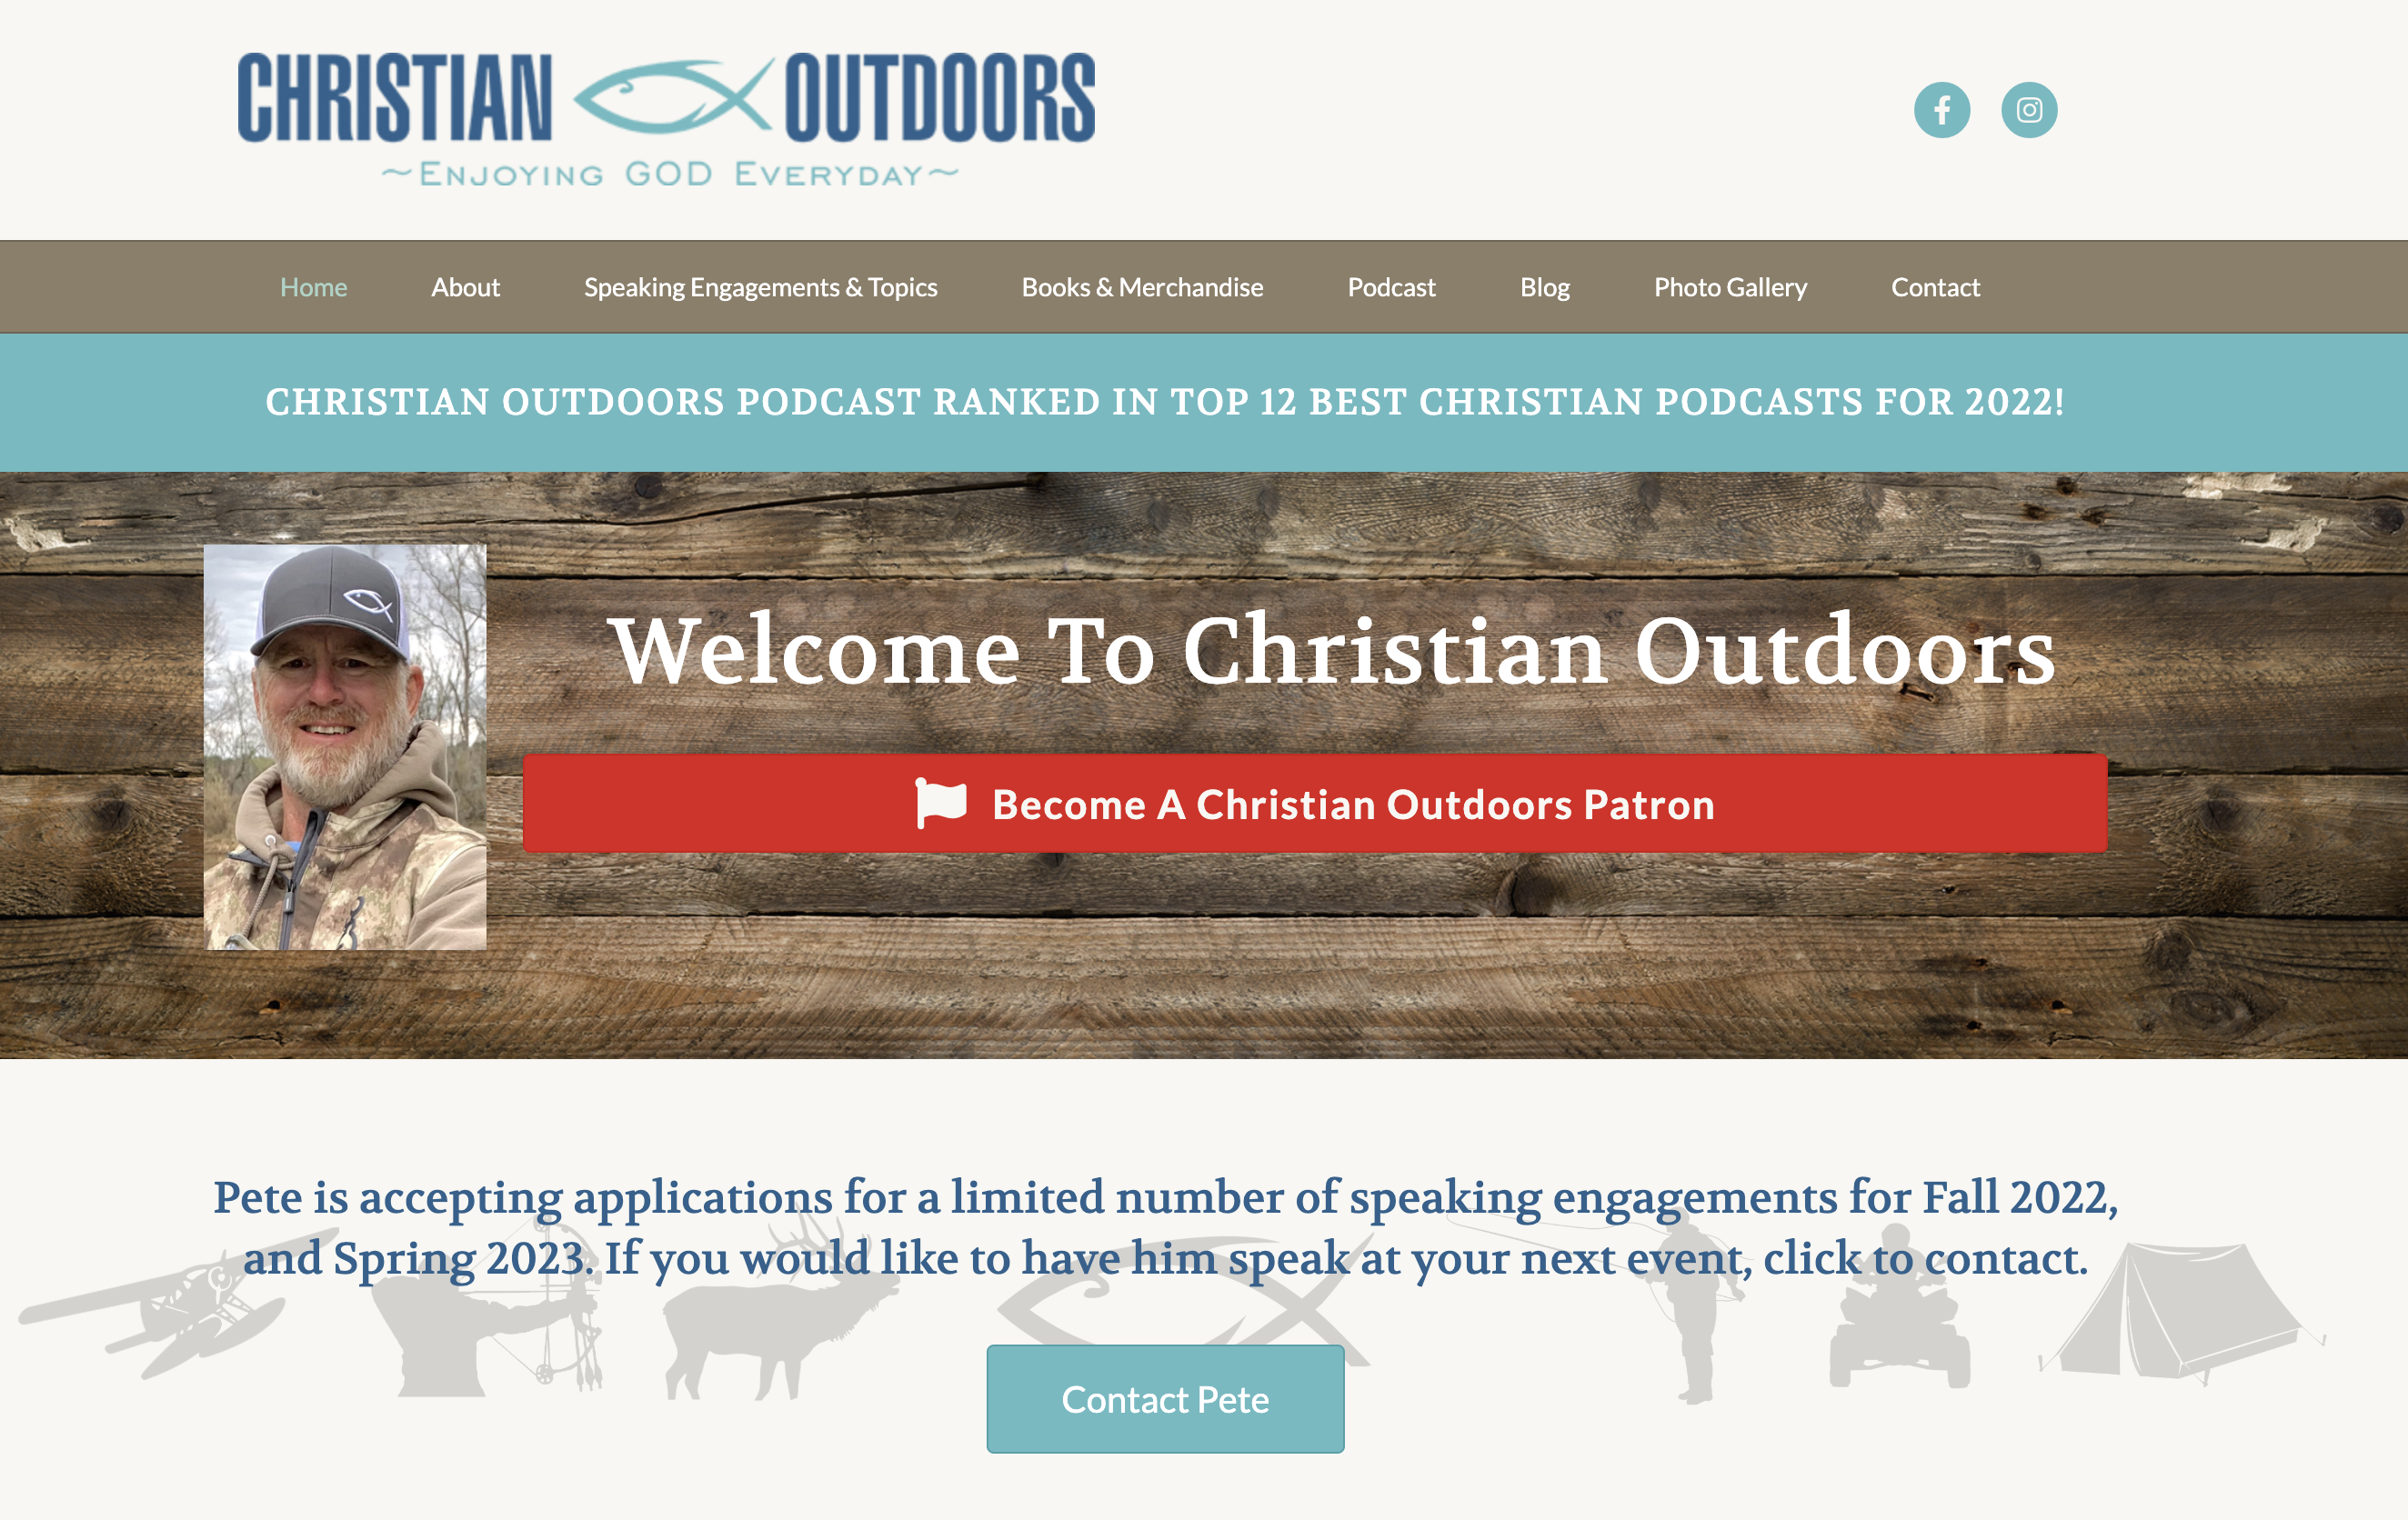 Christian Outdoors